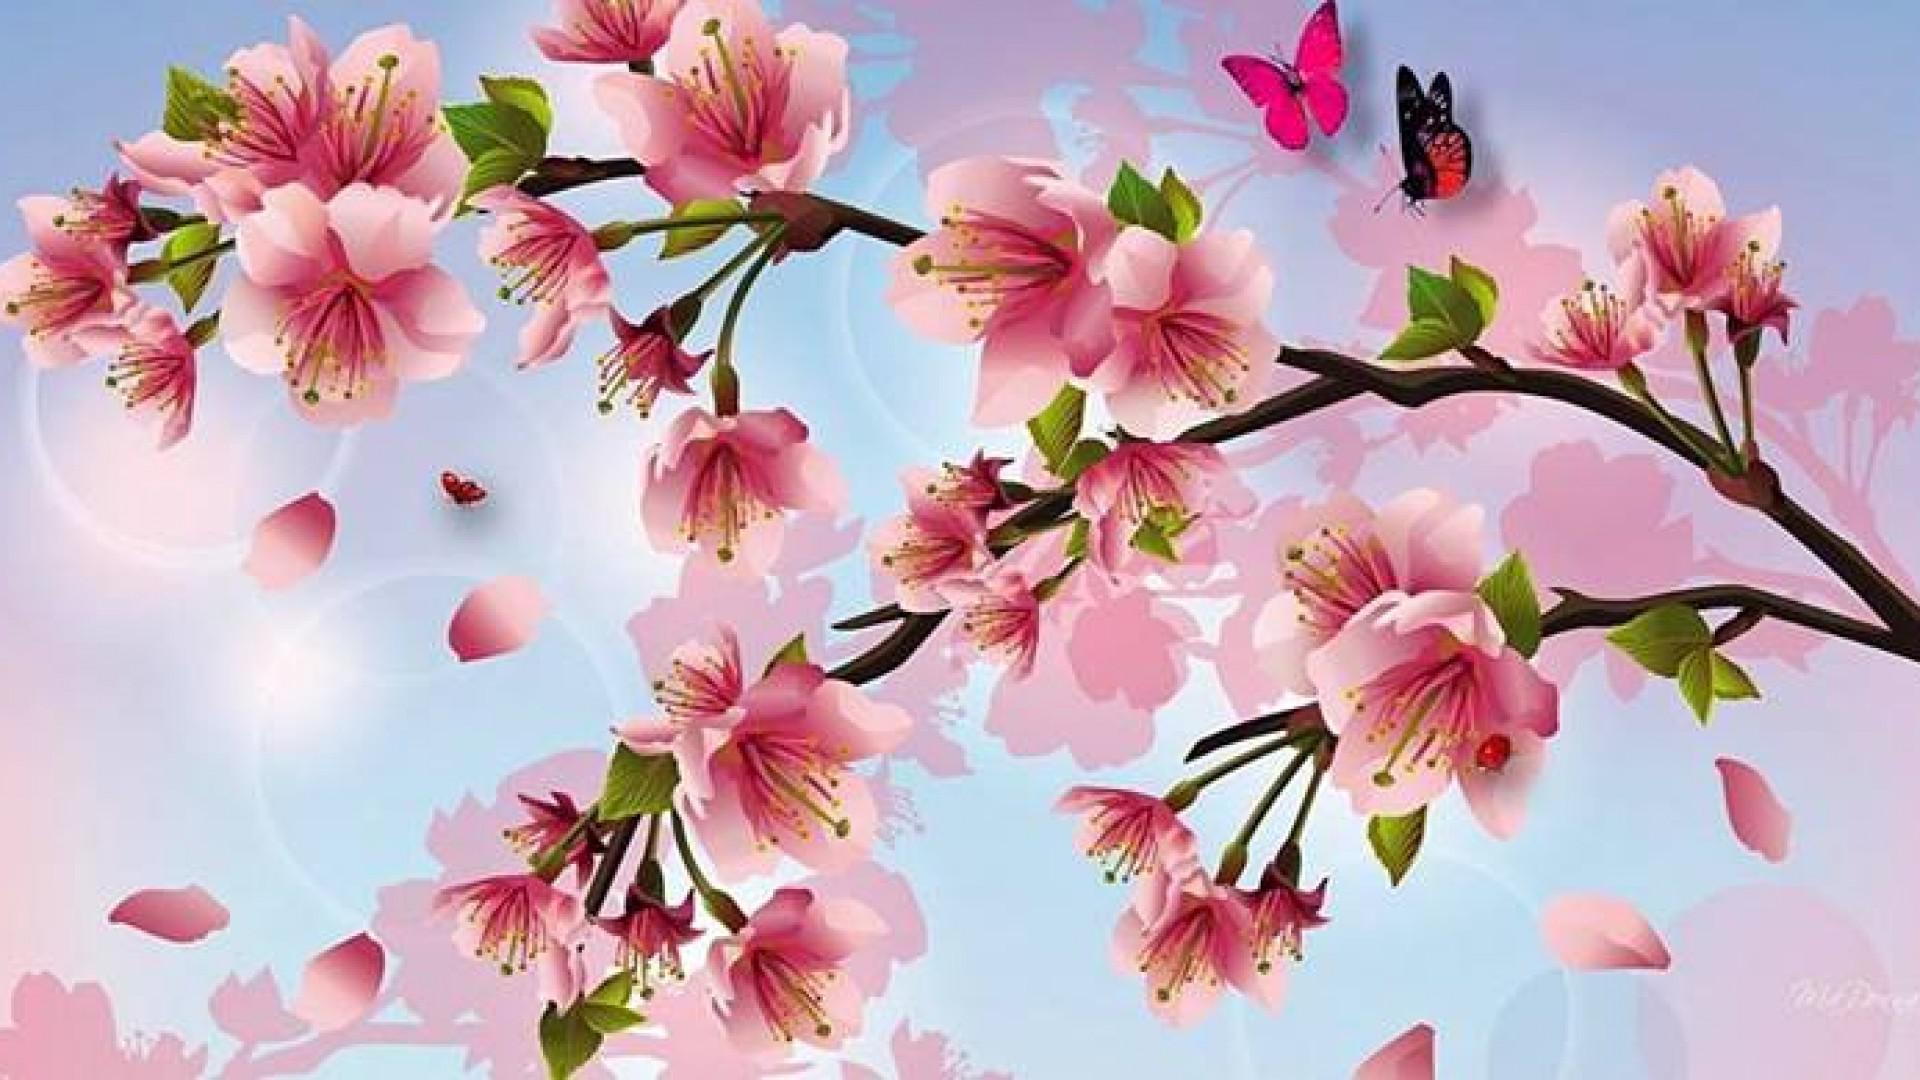 Japanese Cherry Blossom Art Wallpapers - Top Free Japanese ...